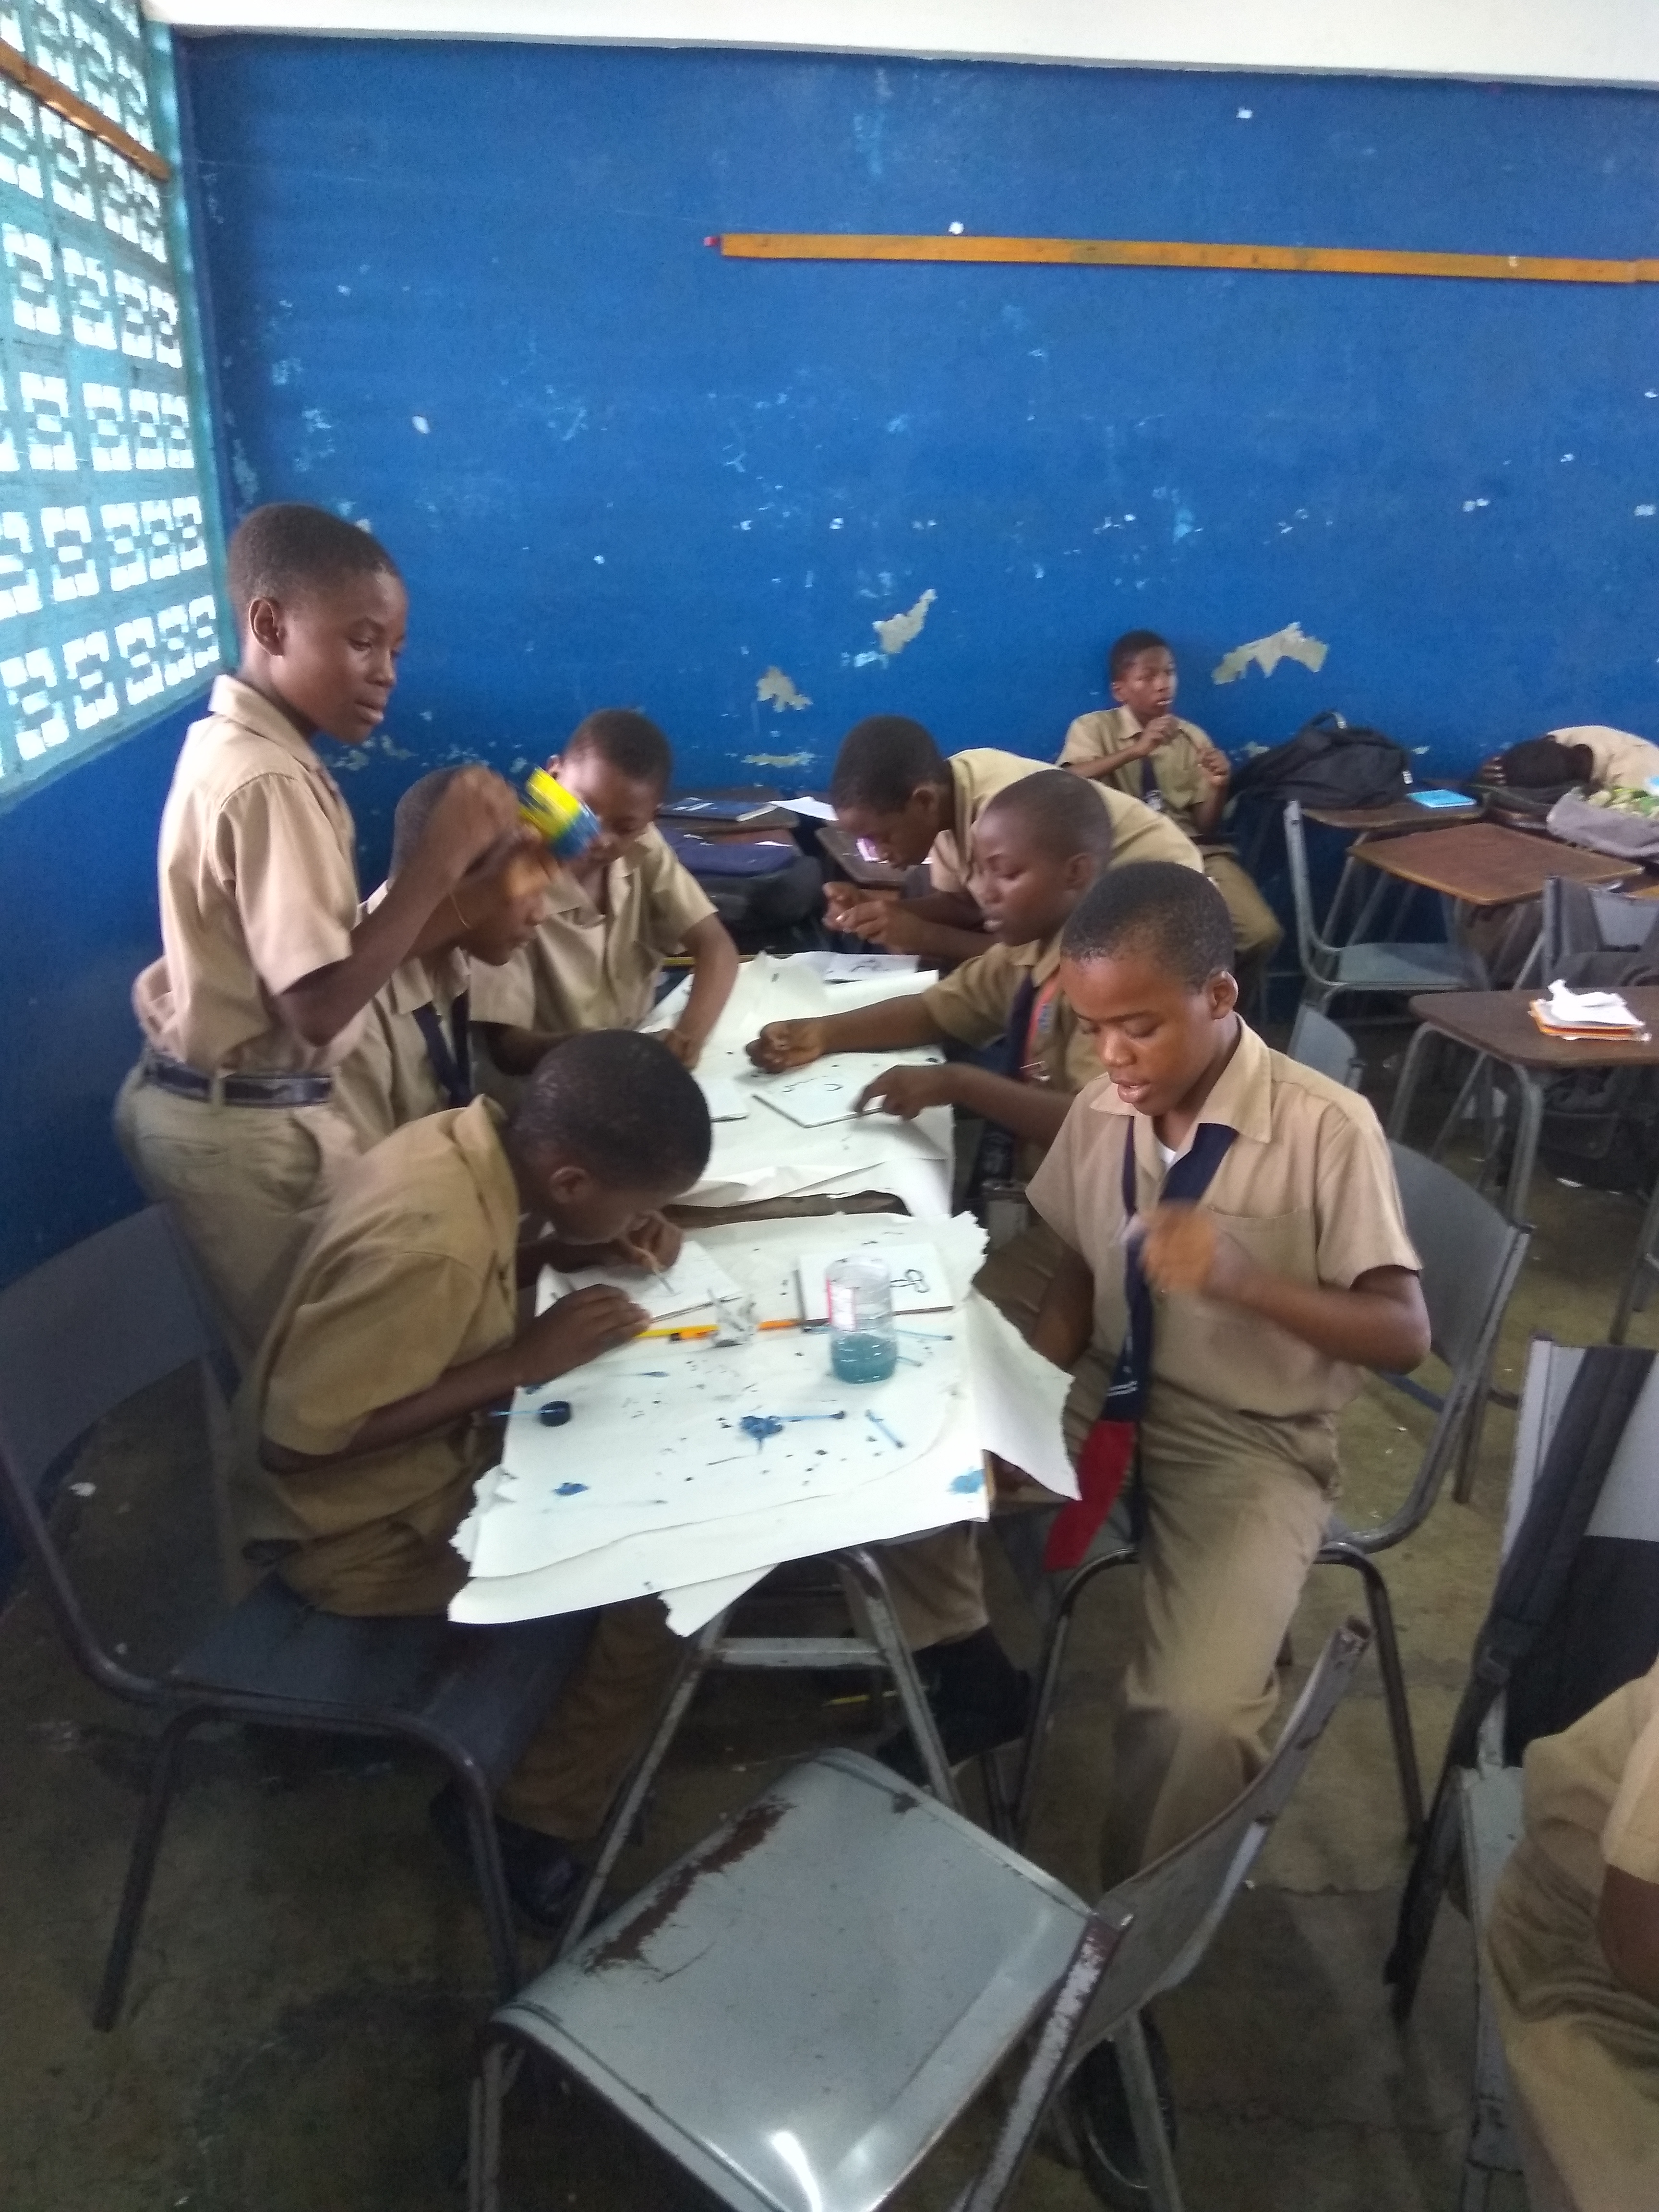 Allman Town Primary 2017 Grade 6 students work enthustiastically on their designs, thoughts and tiles.